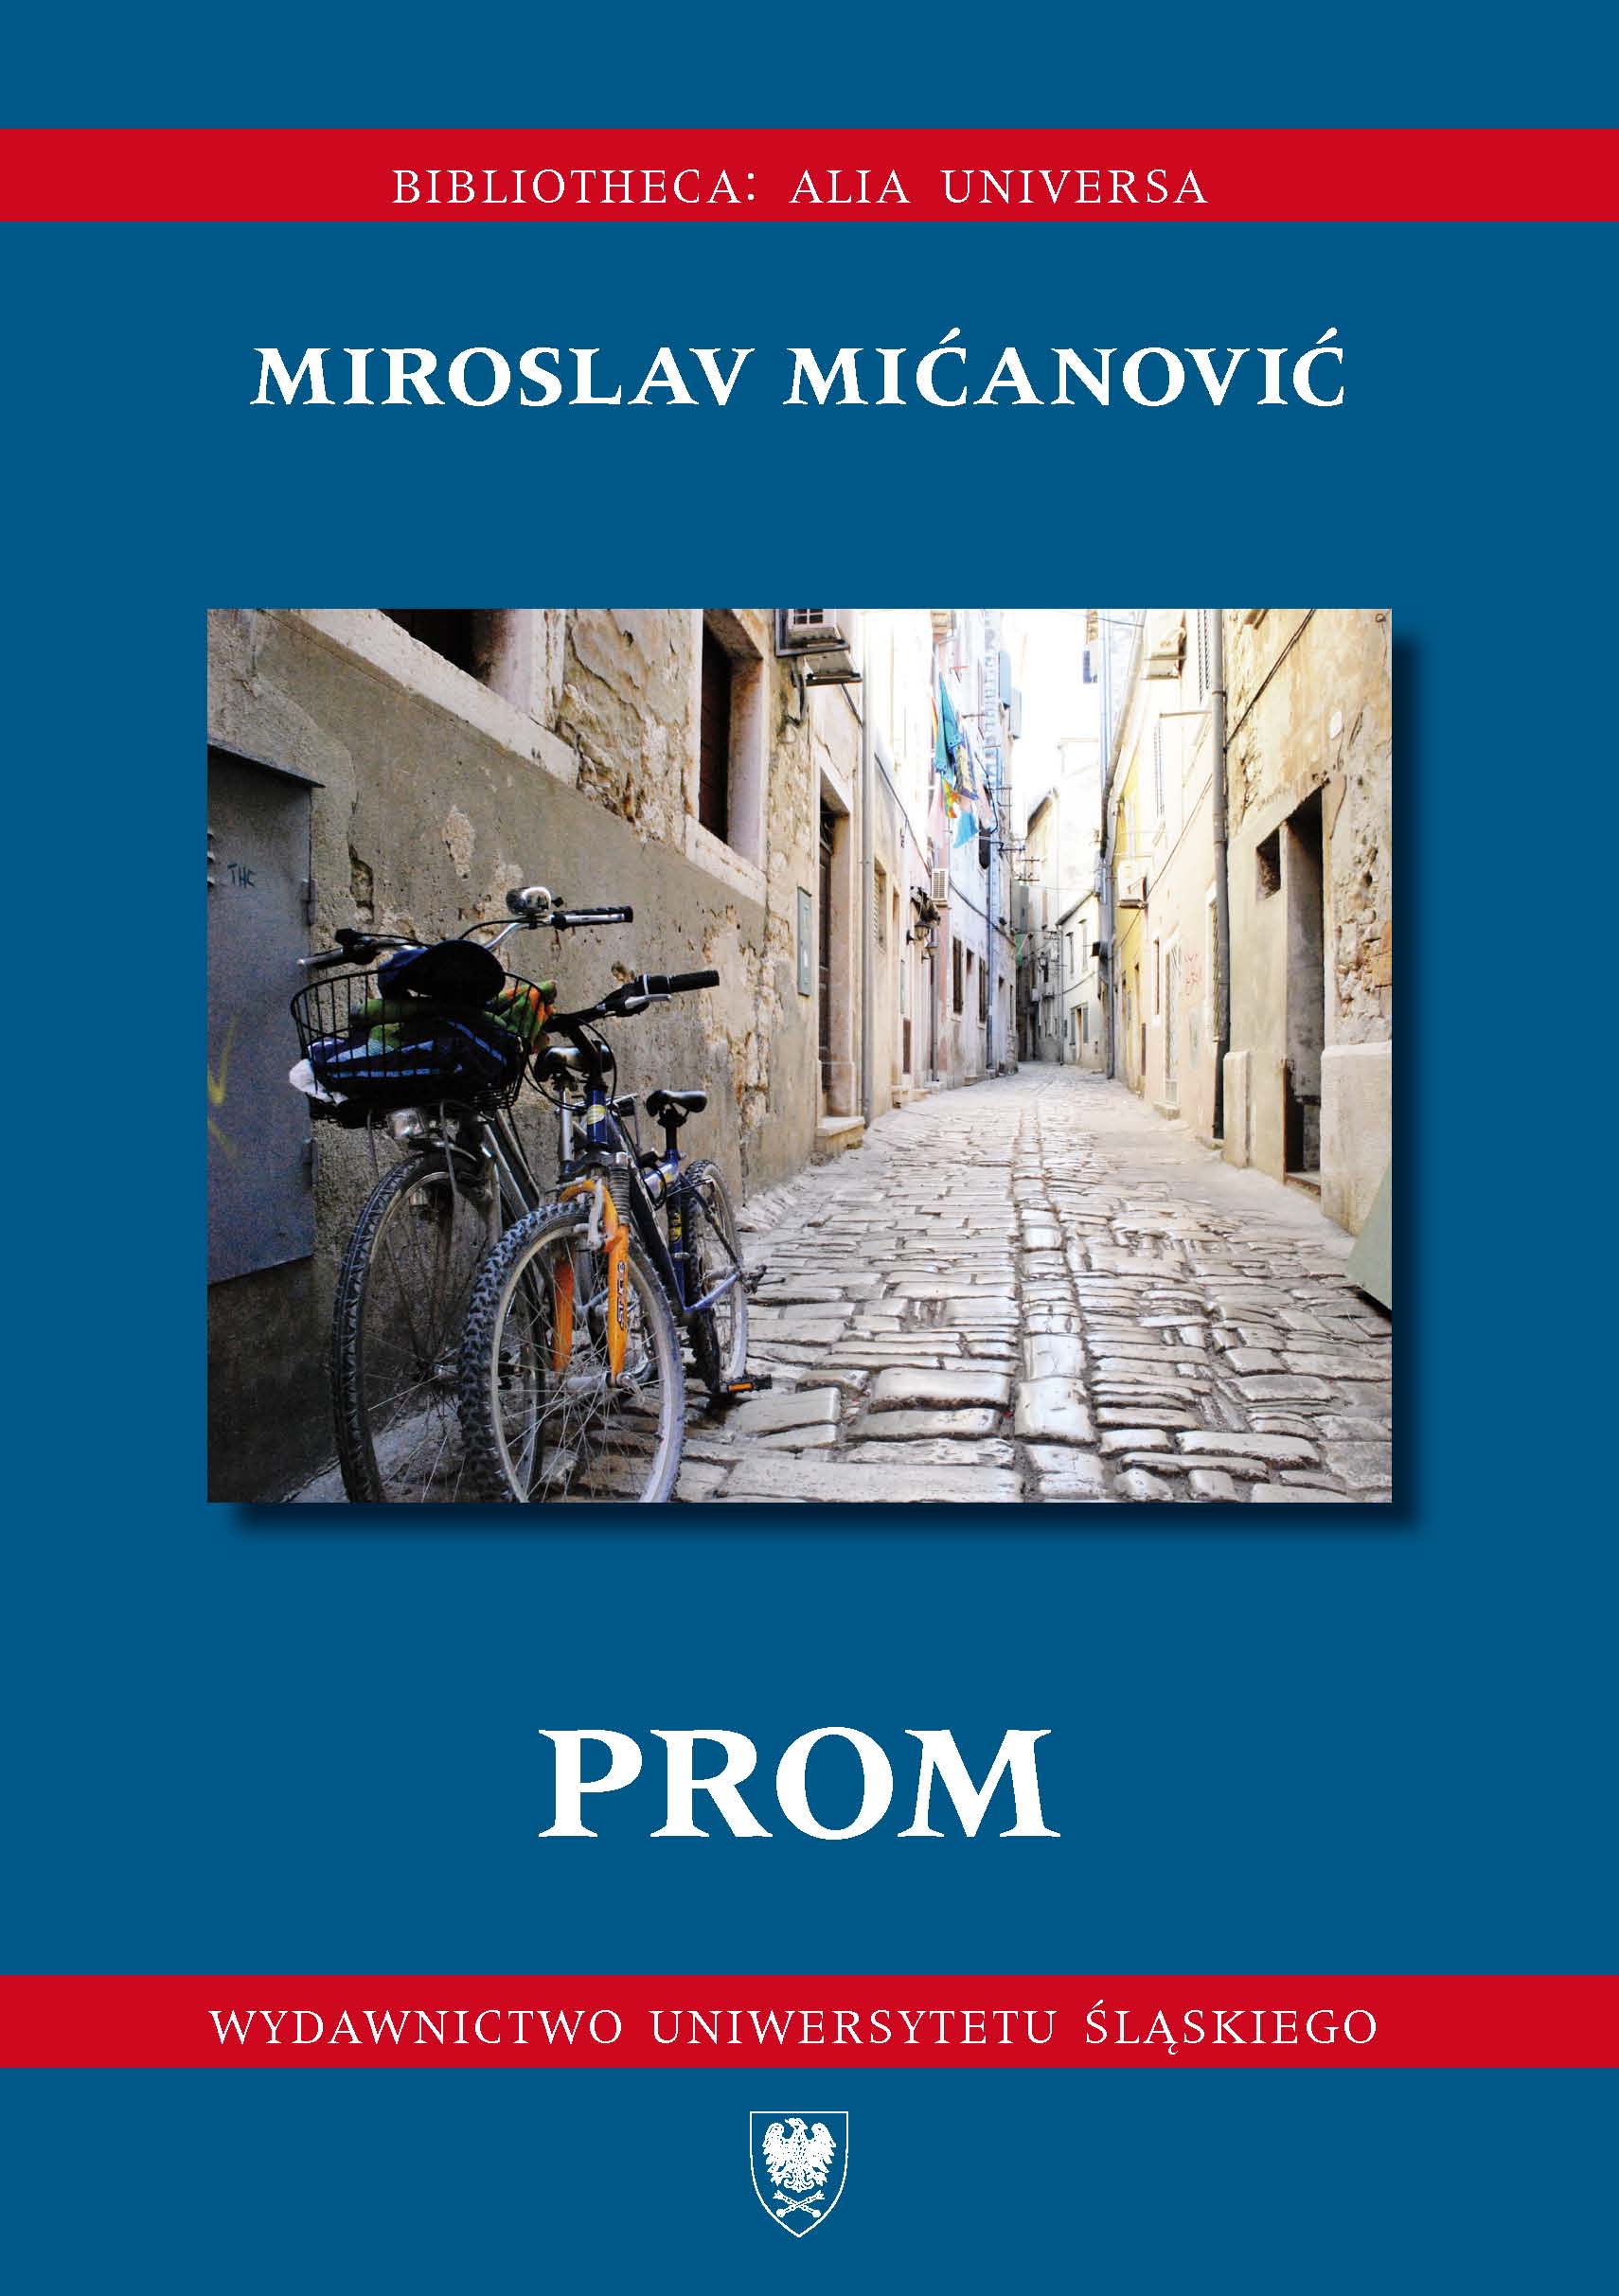 Prom Cover Image